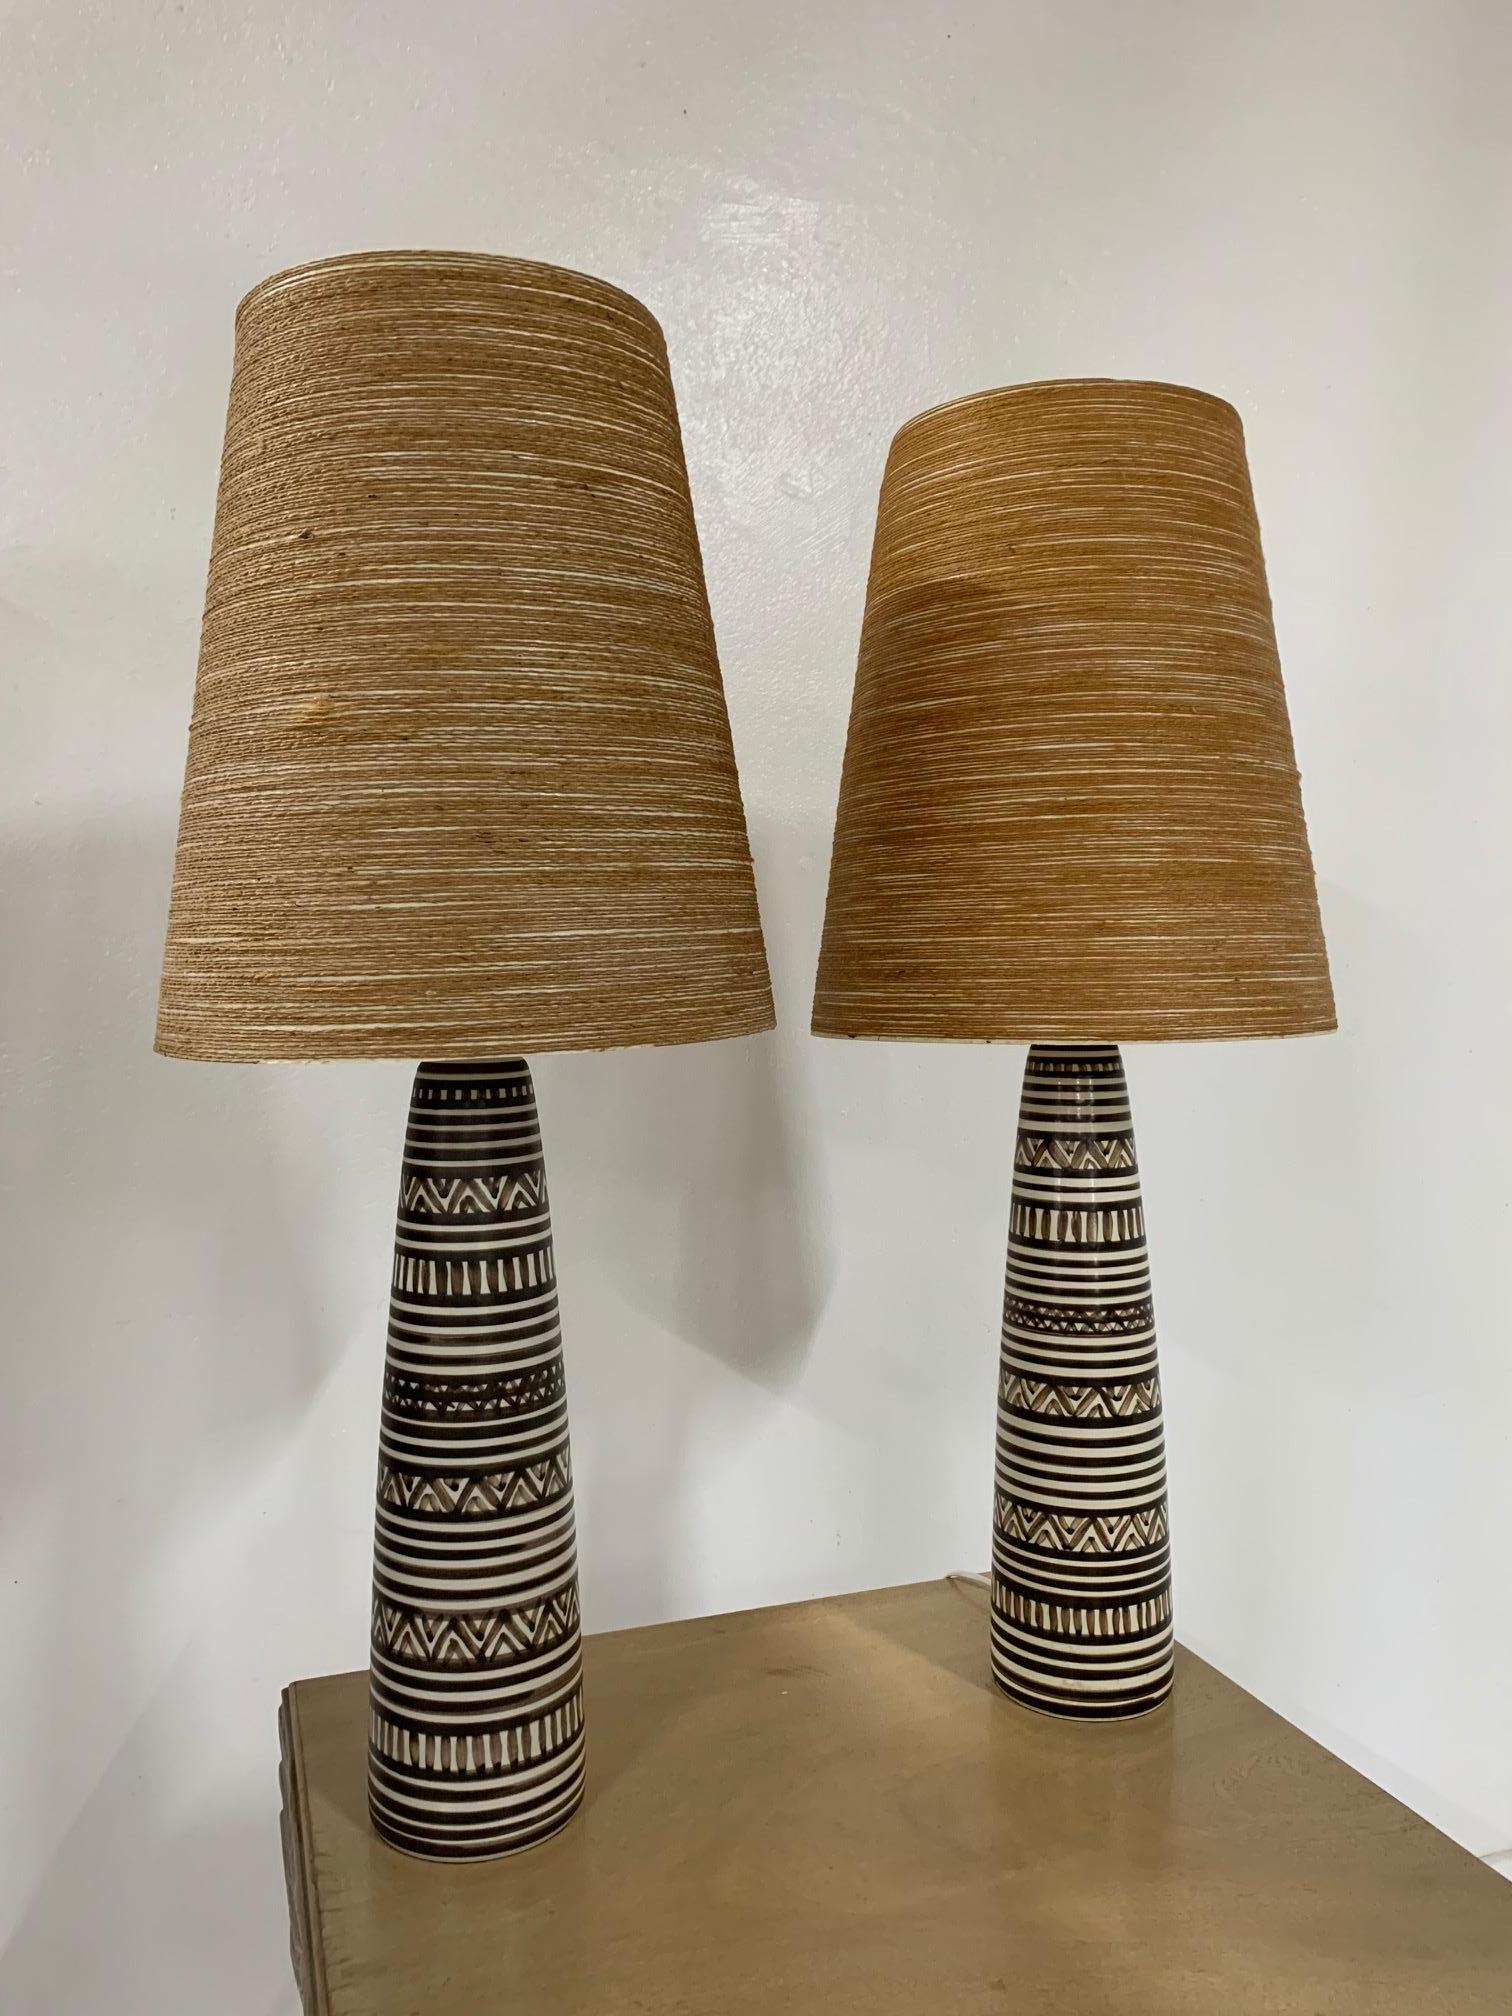 Pair of hand-painted pottery lamps designed by Lotte and Gunnar Bostlund. Has fiberglass shades.